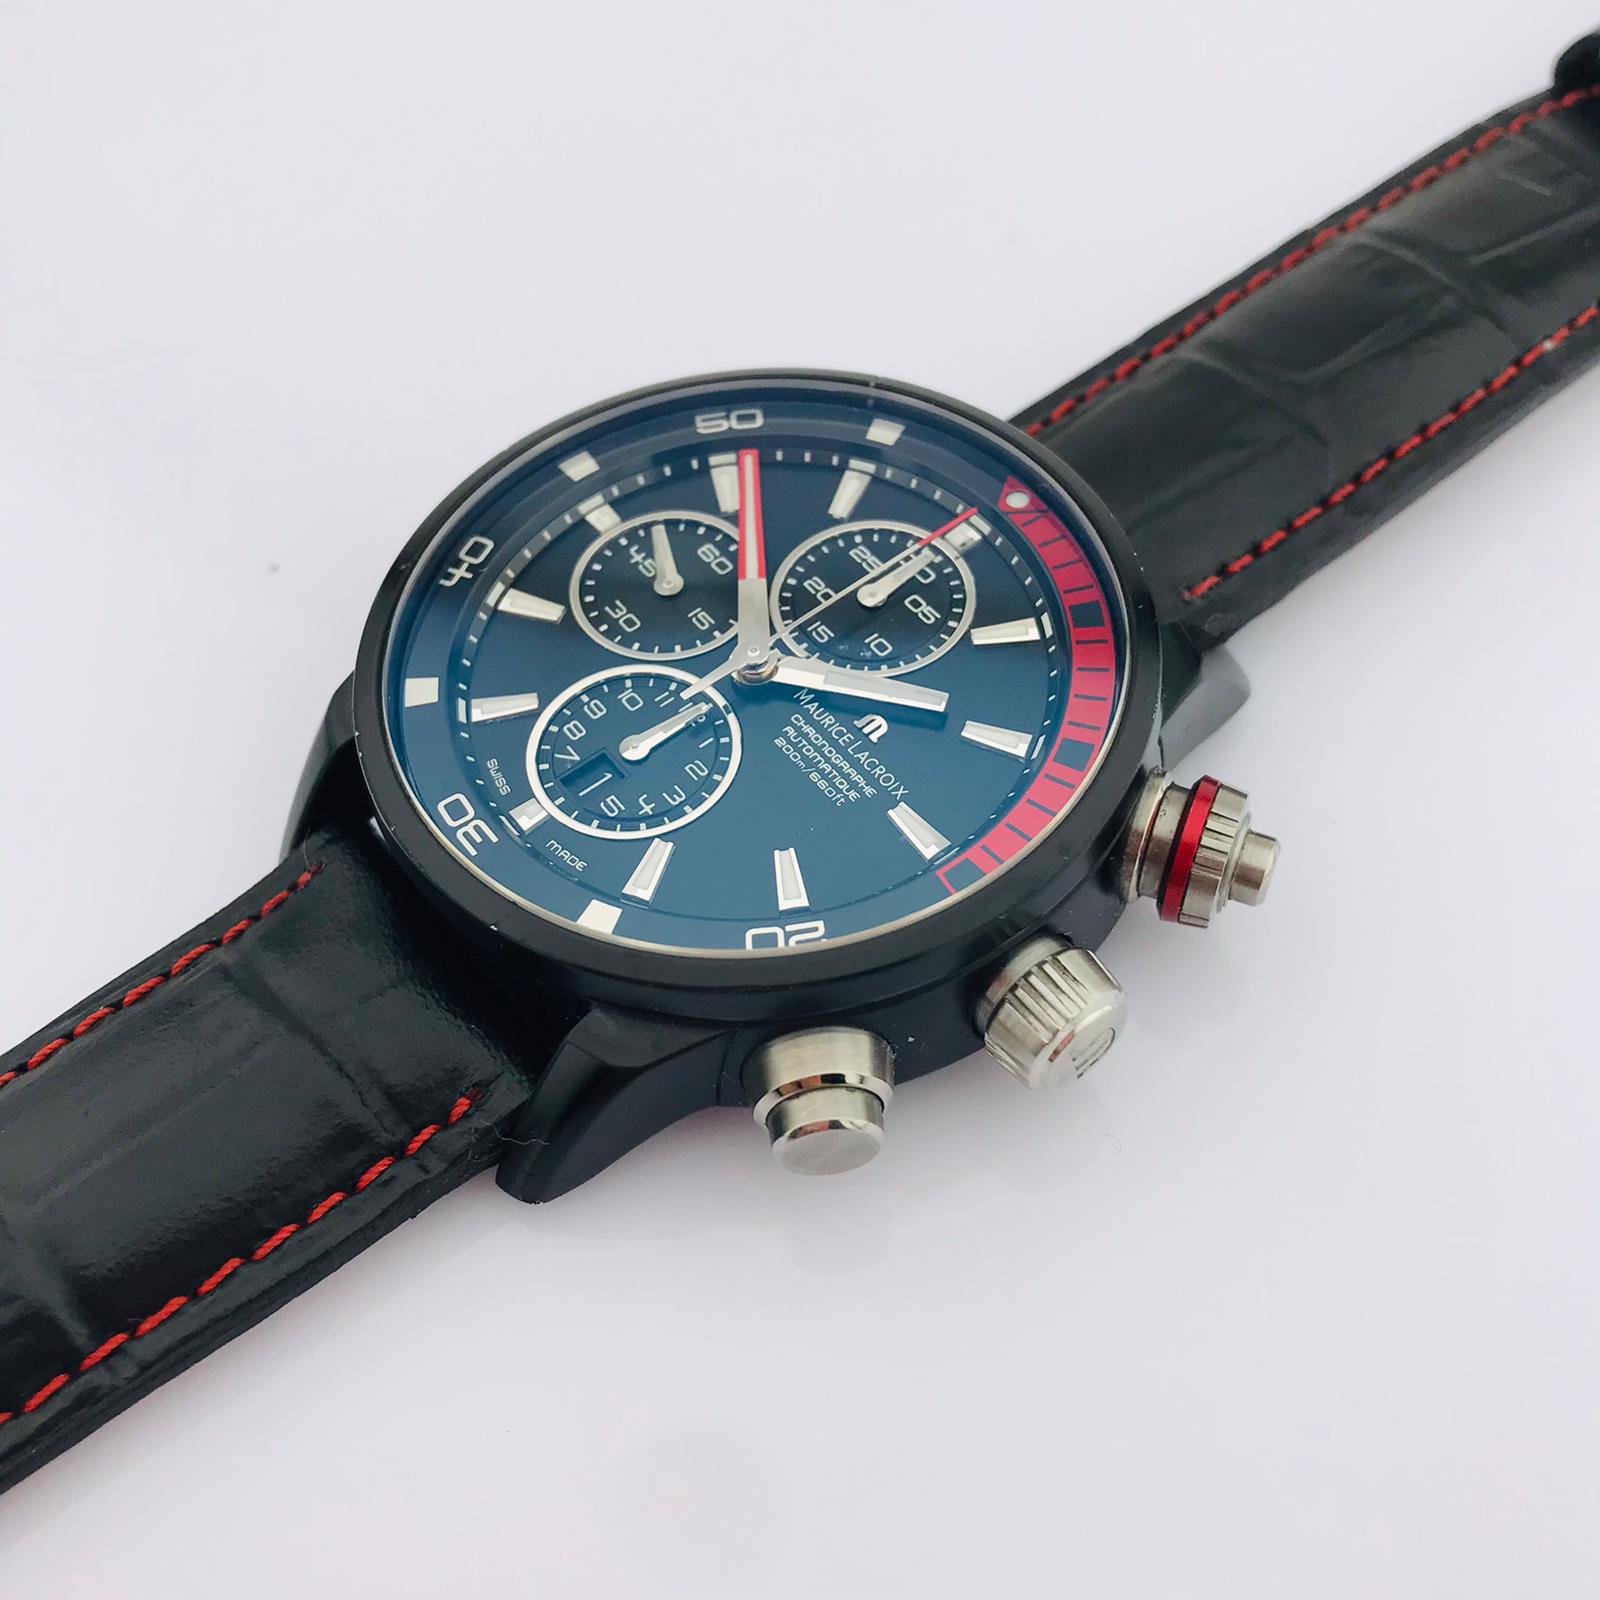 Maurice Lacroix / Pontos S Extreme Chronograph Limited Edition - Gentlmen's Steel Wrist Watch - Image 8 of 11